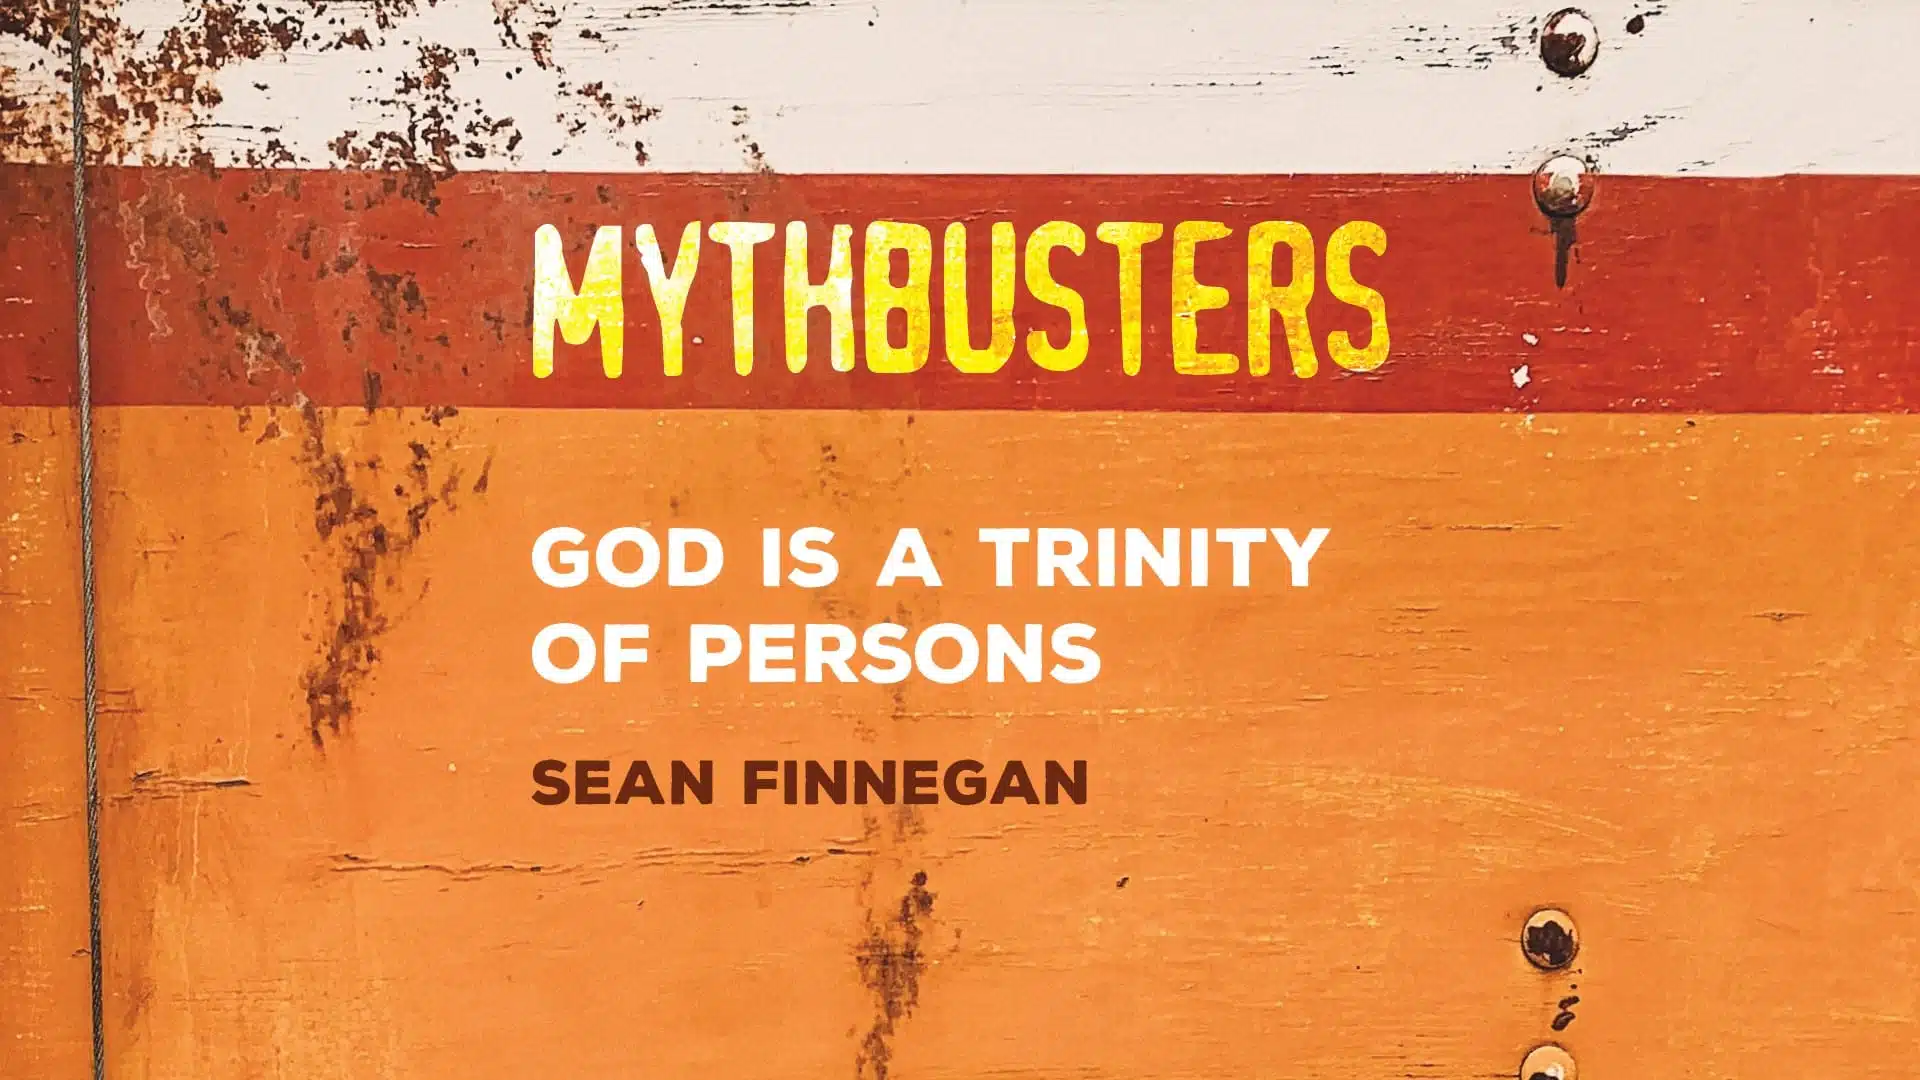 Myth: God is a Trinity of Persons